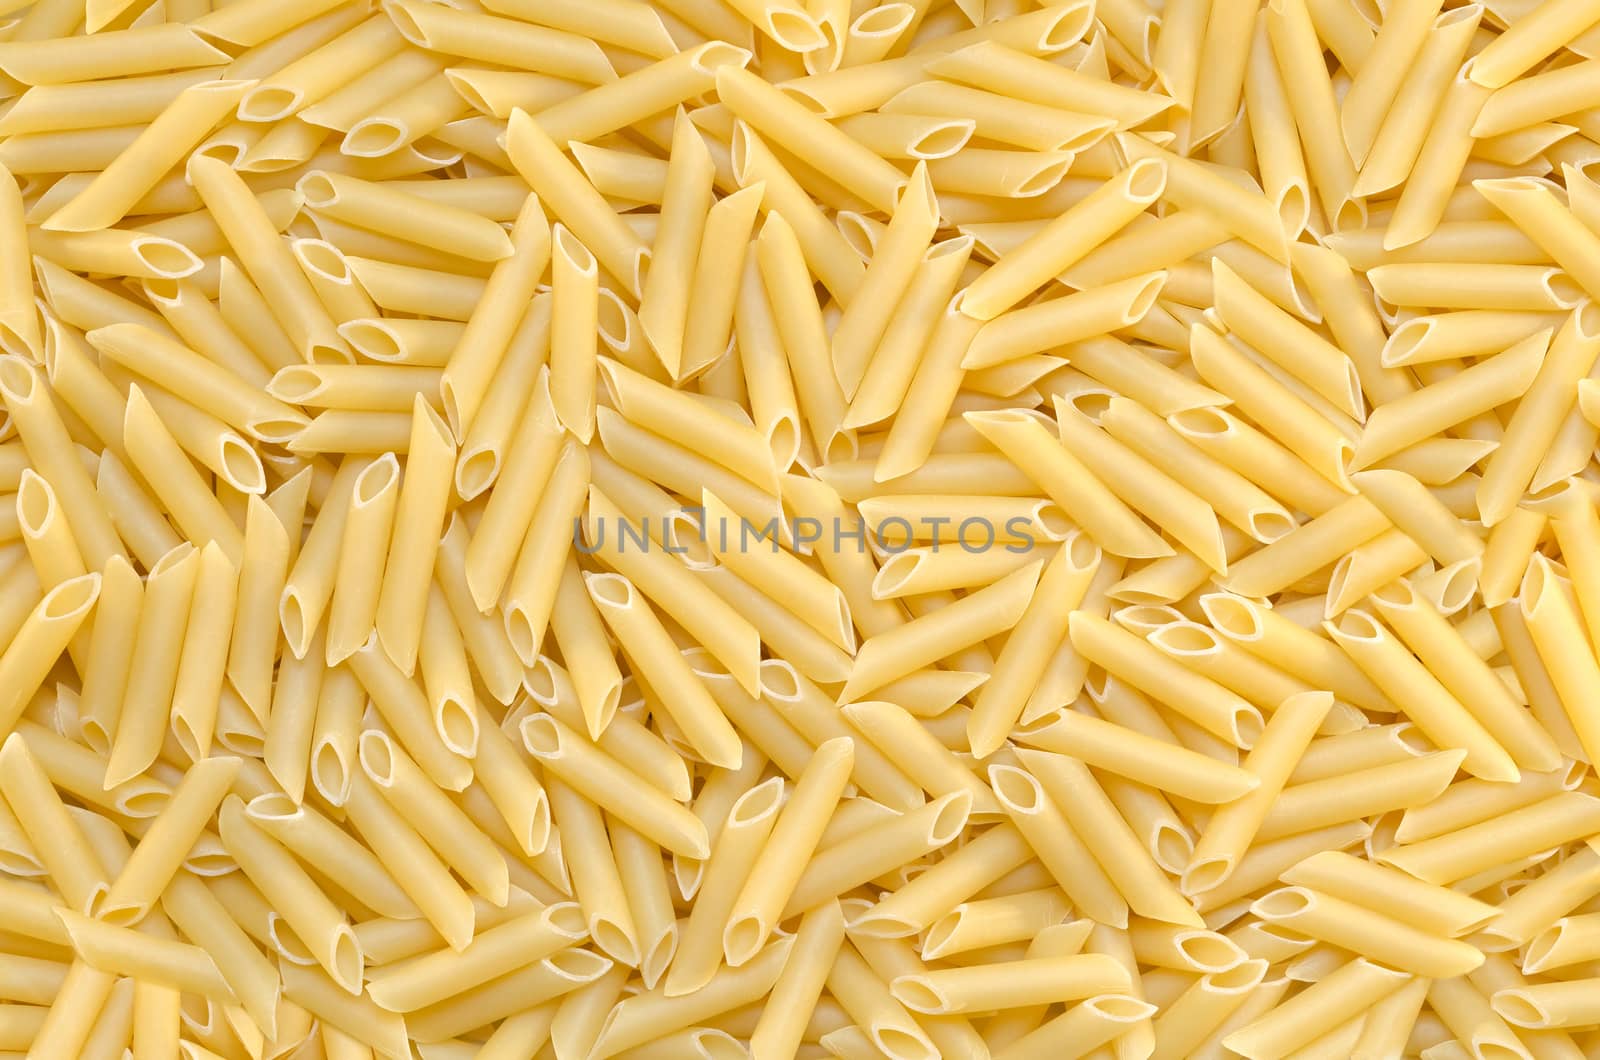 Textured background of pasta by Gaina